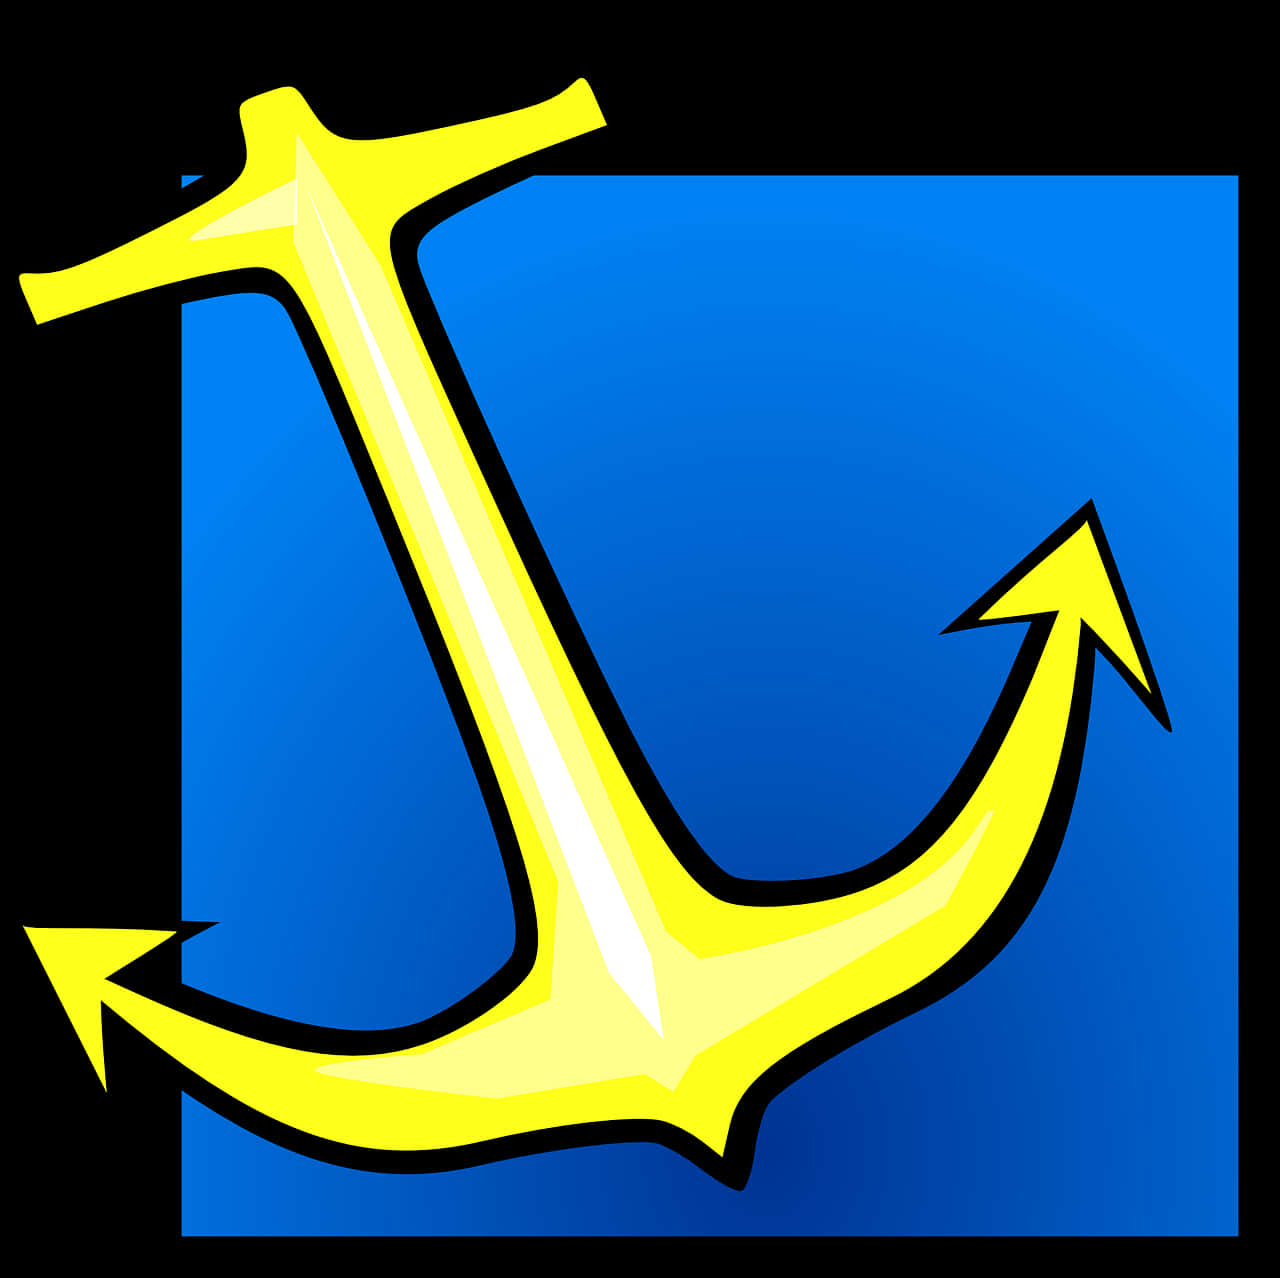 A Yellow Anchor On A Blue Square